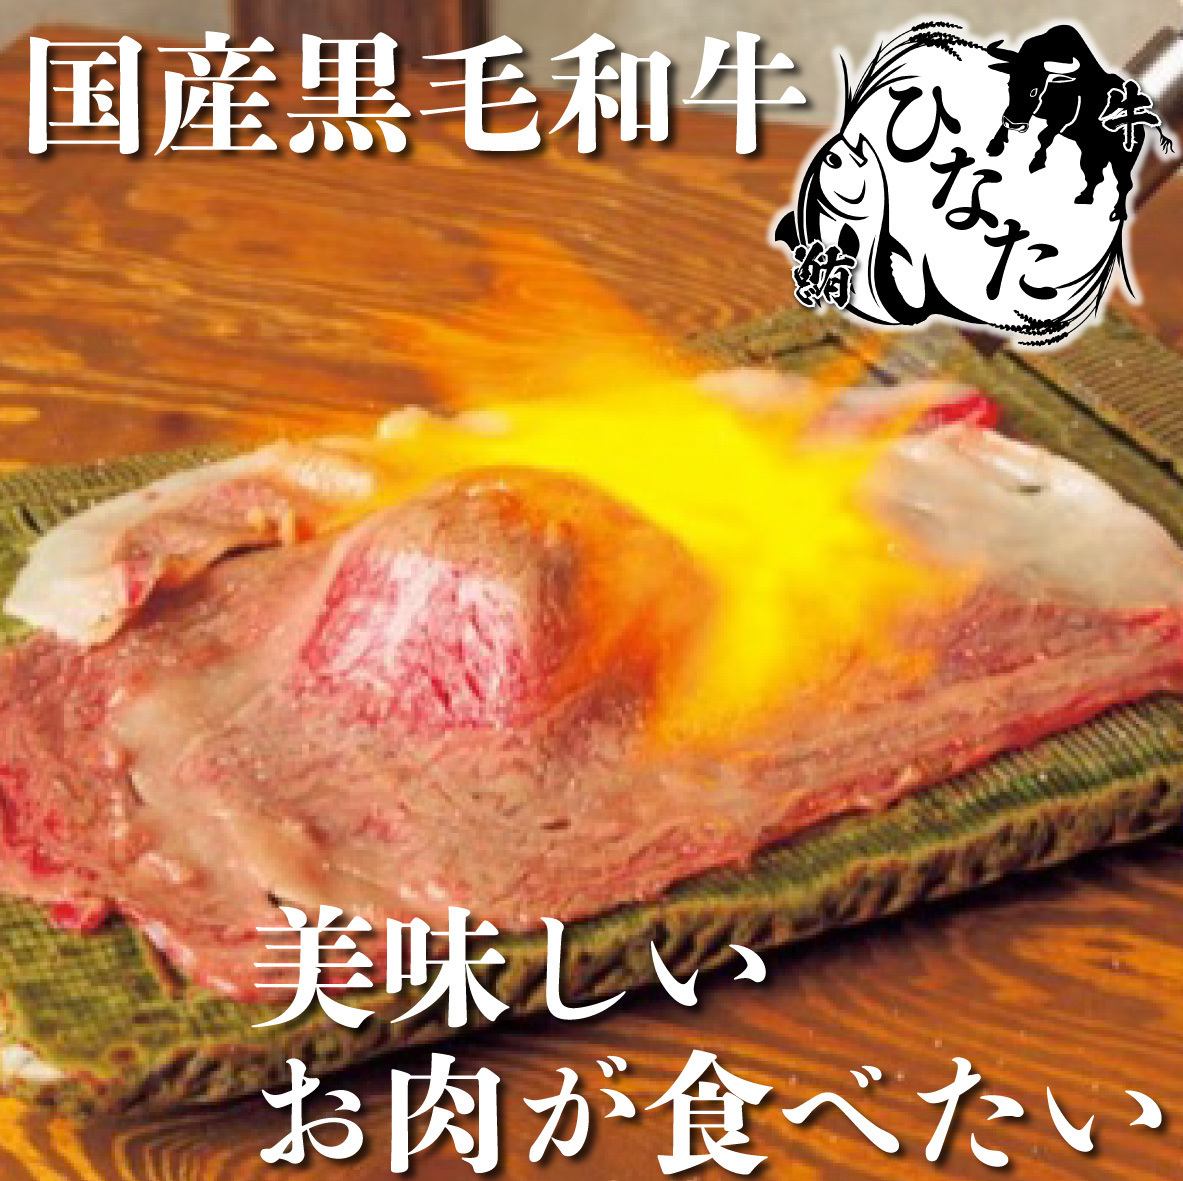 You can enjoy A5 rank meat♪